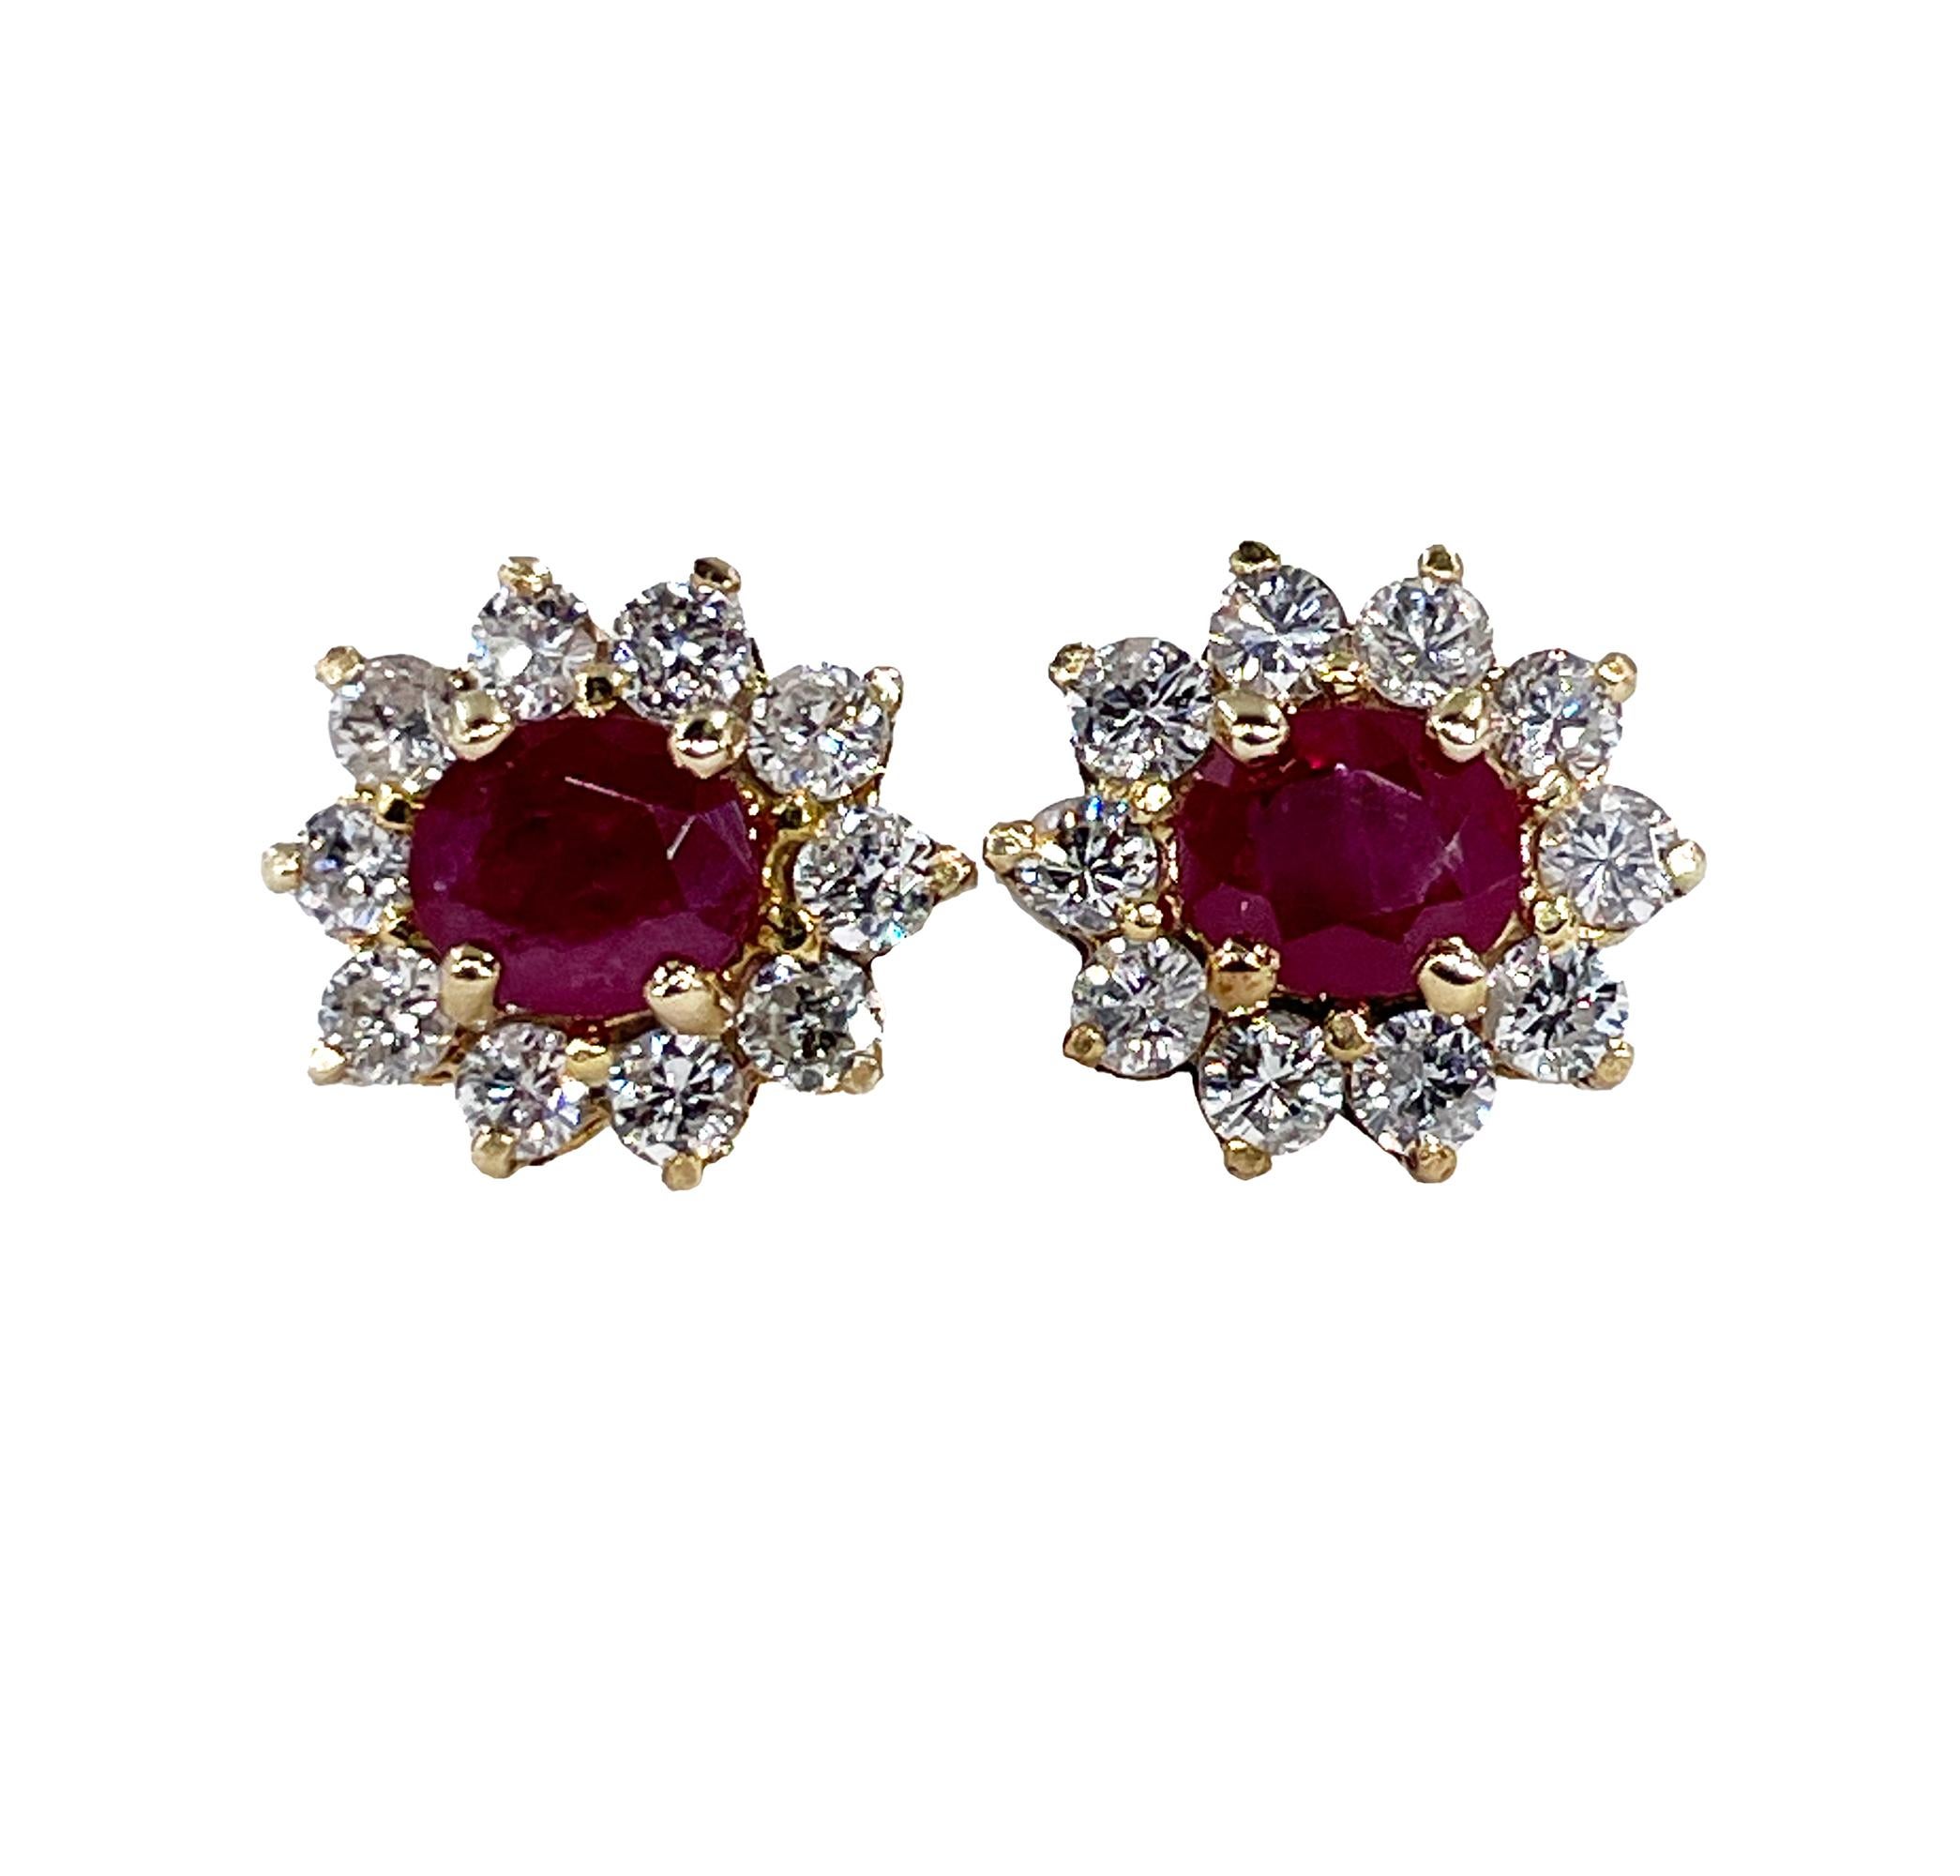 Vintage Cluster 1.50ctw Oval Red RUBY & Diamonds 14k & 18k Yellow Gold Estate Stud Post Earrings, Ear Pendants

This Vintage Pair of Stud-Earrings will take your breath away! From our Estate Gemstone Collection. Be in your work or evening attire,